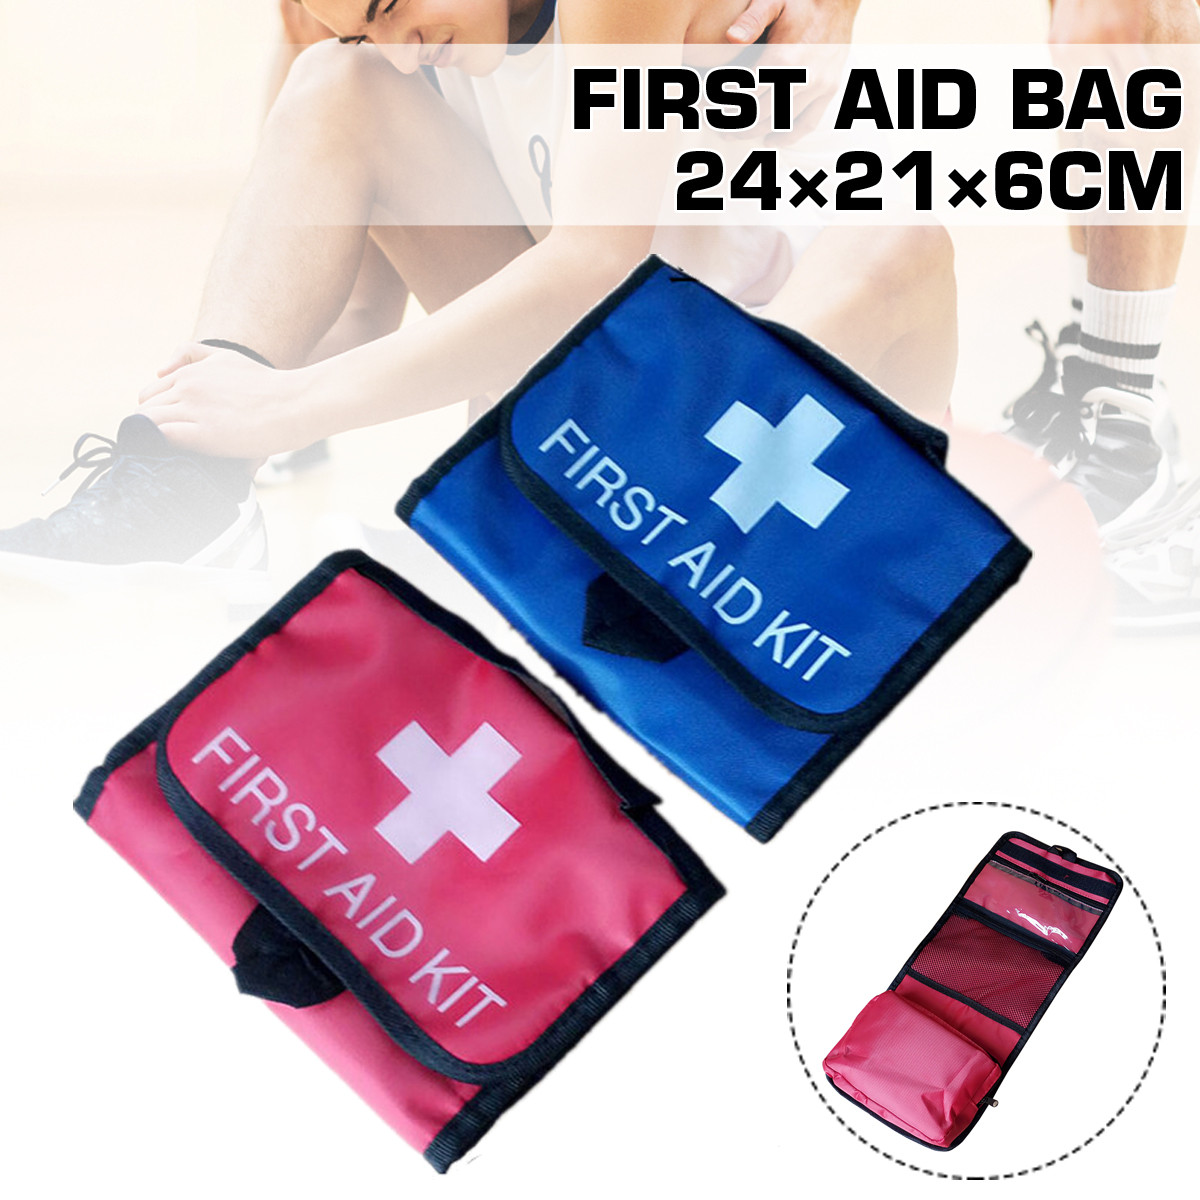 Outdoor-Portable-First-Aid-Kit-Medical-Storage-Bag-Waterproof-Car-Carrying-Household-Emergency-Kit-T-1757235-1